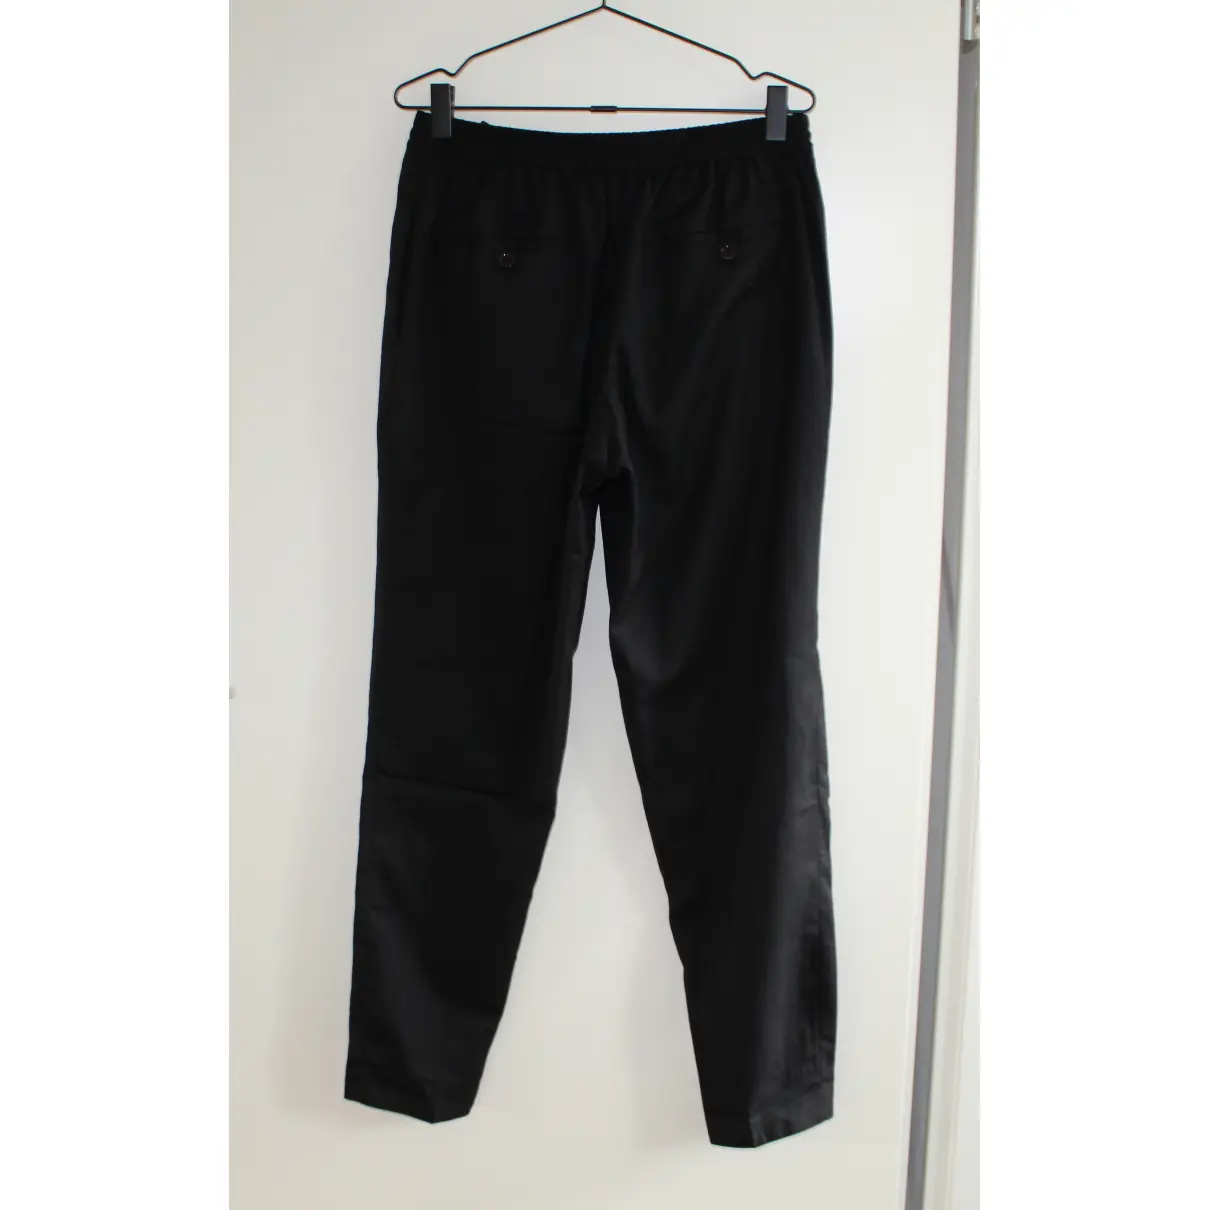 Buy Carven Trousers online